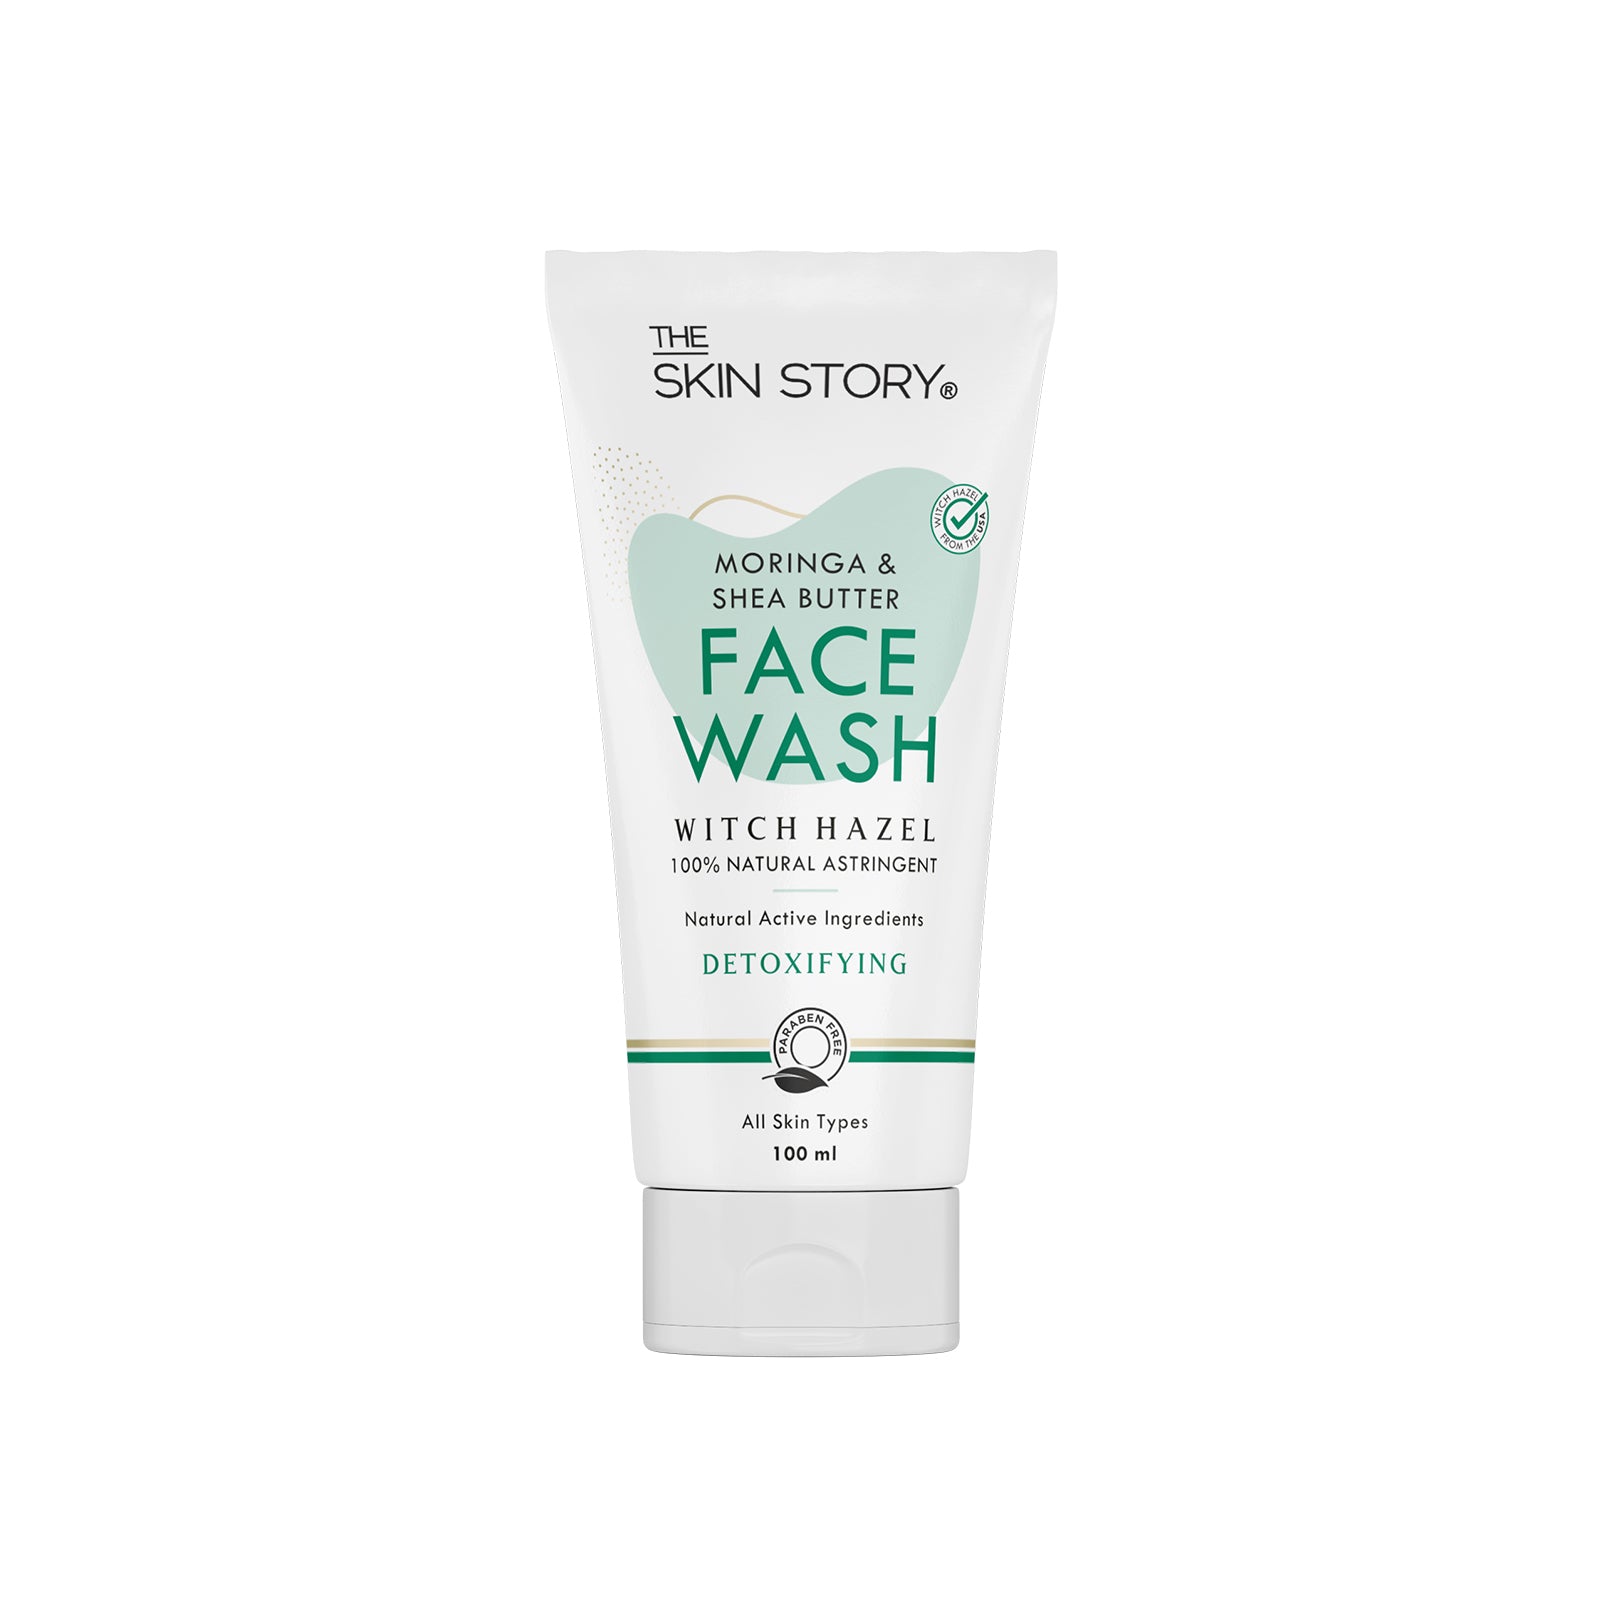 The Skin Story Pore Cleansing Facewash | Gentle Skin Cleanser | All Skin Types | Moringa & Shea Butter | 100ml